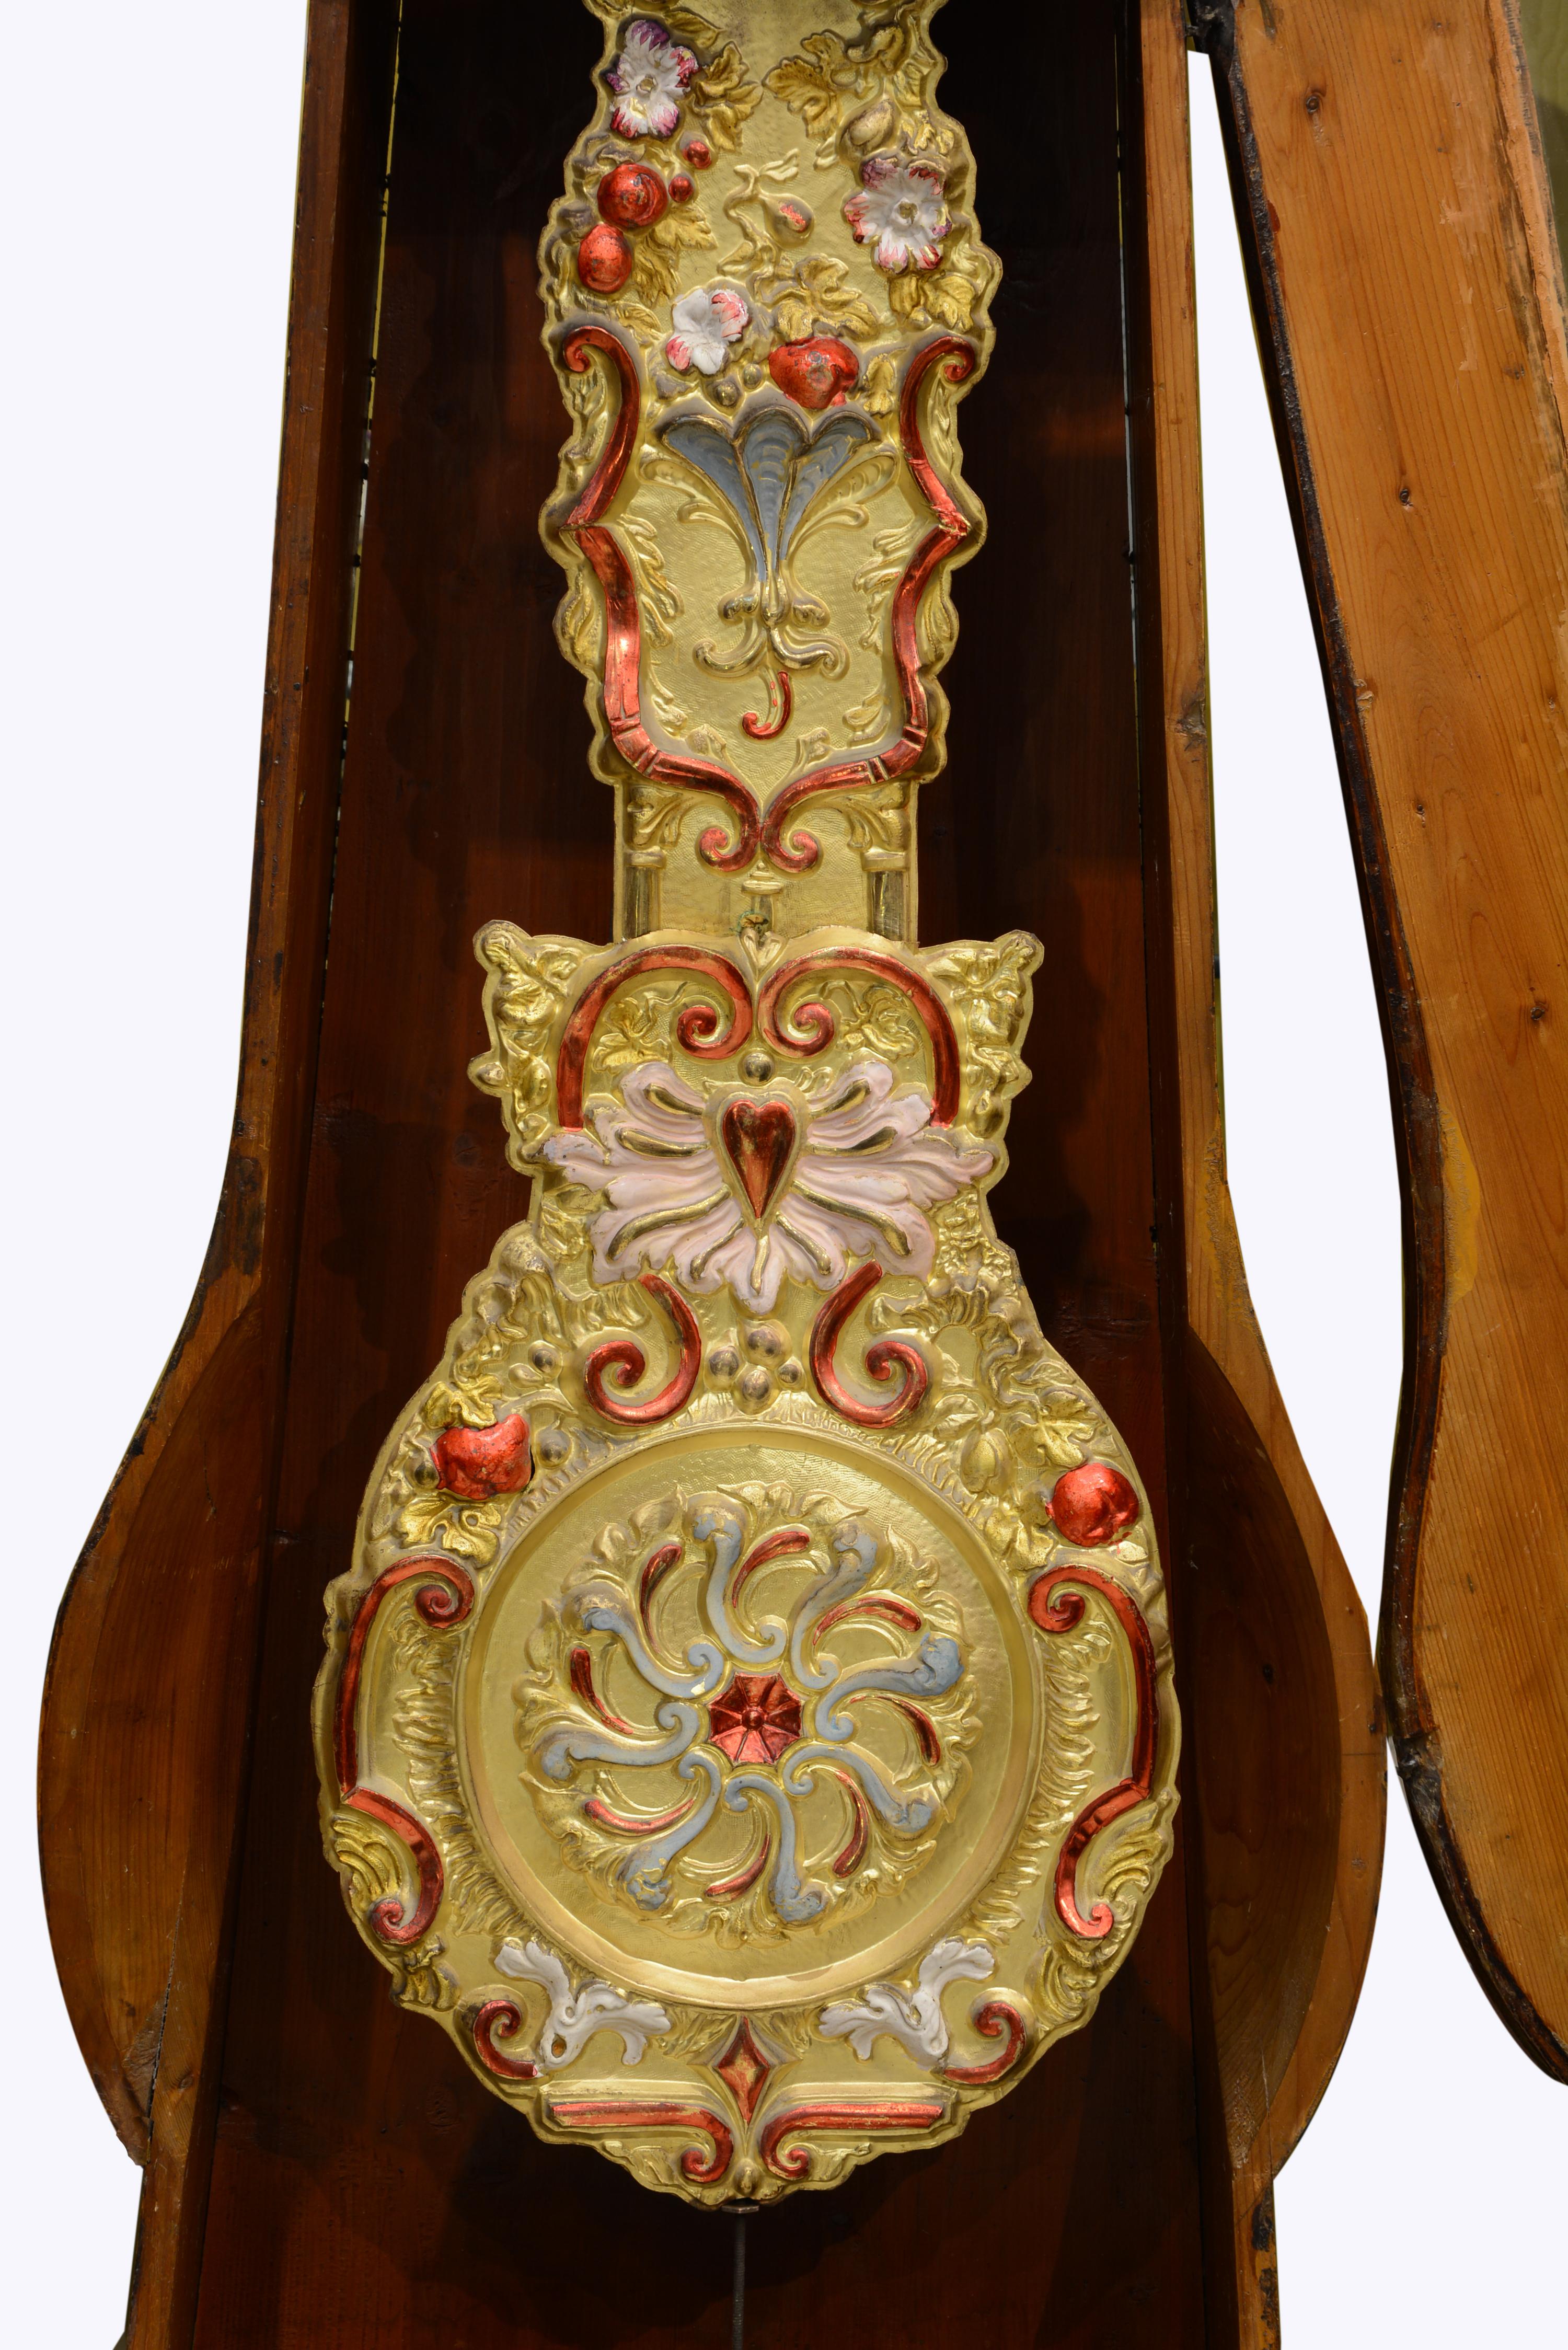 Royal Morez type pendulum clock with case, France, 19th century.
Magnificent grandfather clock with a box decorated in engraved wood and polychrome with floral motifs. The pendulum is highlighted by a plate in which various colored plant elements